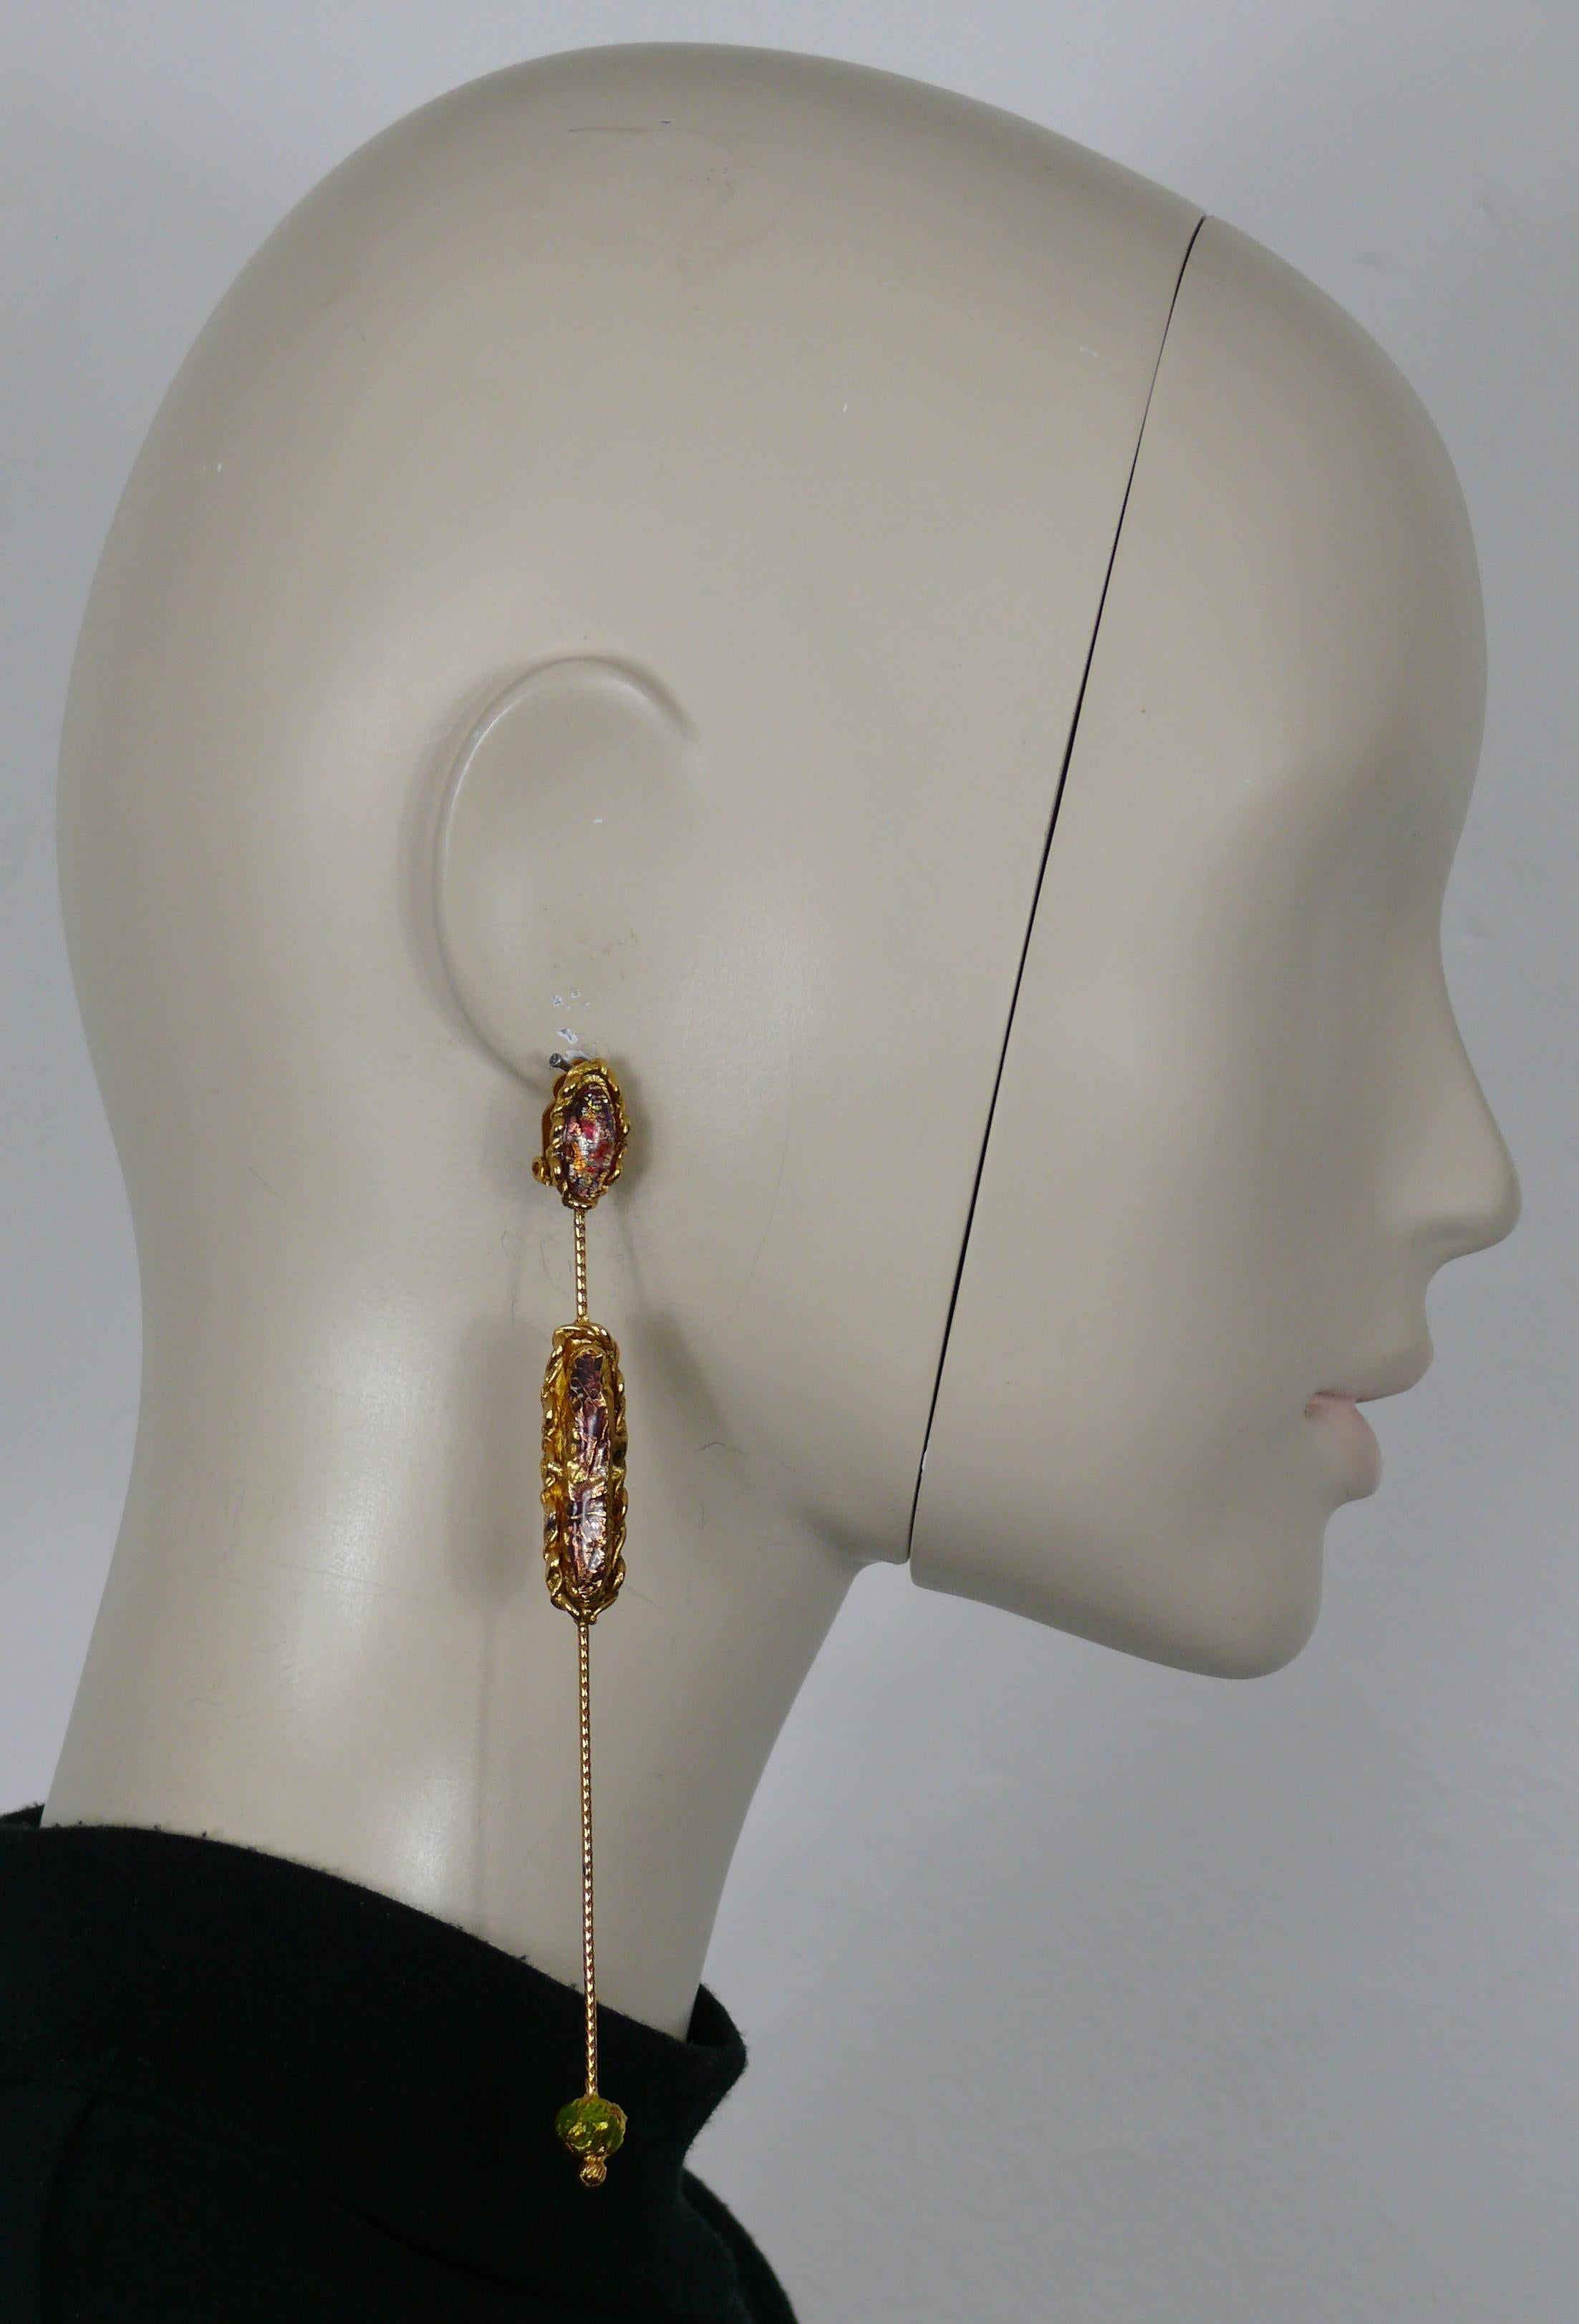 CHRISTIAN LACROIX vintage gold tone extra long dangling earrings (clip-on) embellished with an oval glass cabochon and enamel.

Marked CHRISTIAN LACROIX CL Made in France.

Indicative measurements : height approx. 14 cm (5.51 inches) / max. width